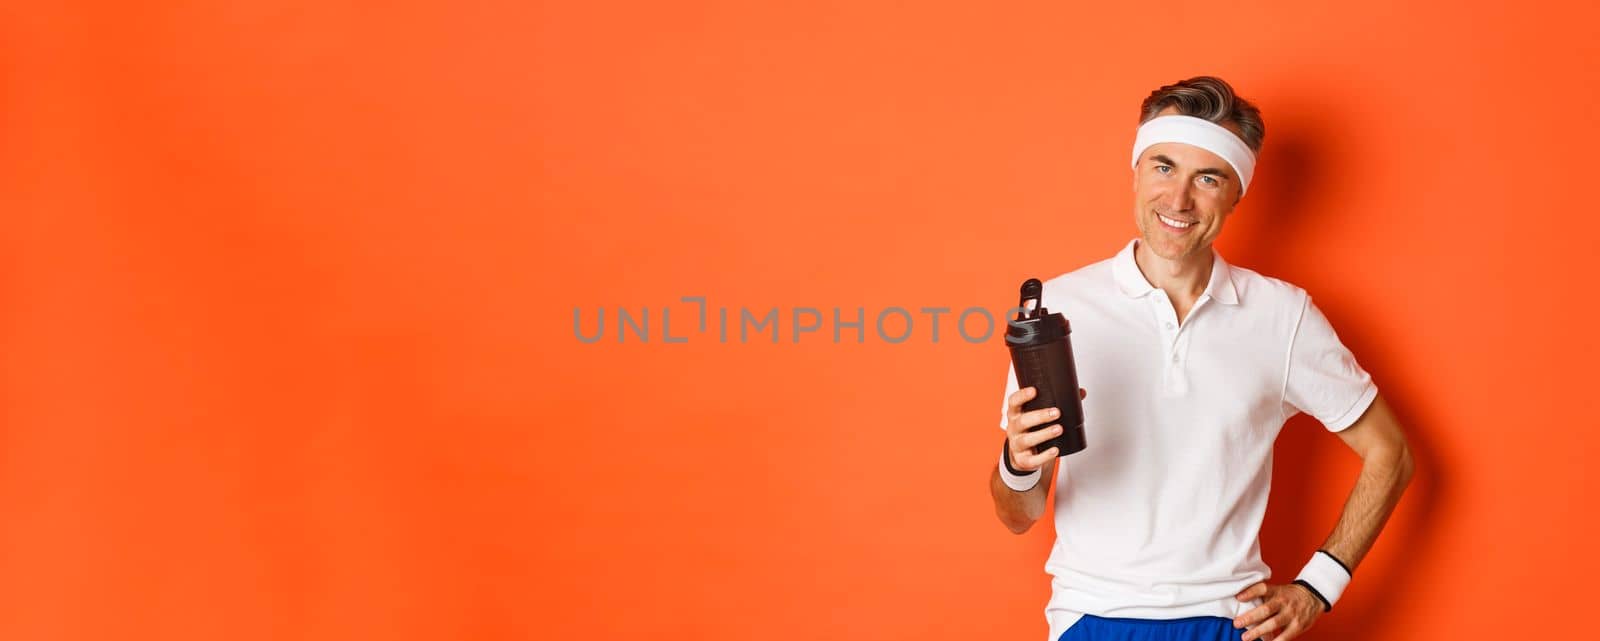 Portrait of healthy and fit male athlete, wearing gym uniform, drinking water or protein and smiling pleased, standing over orange background.